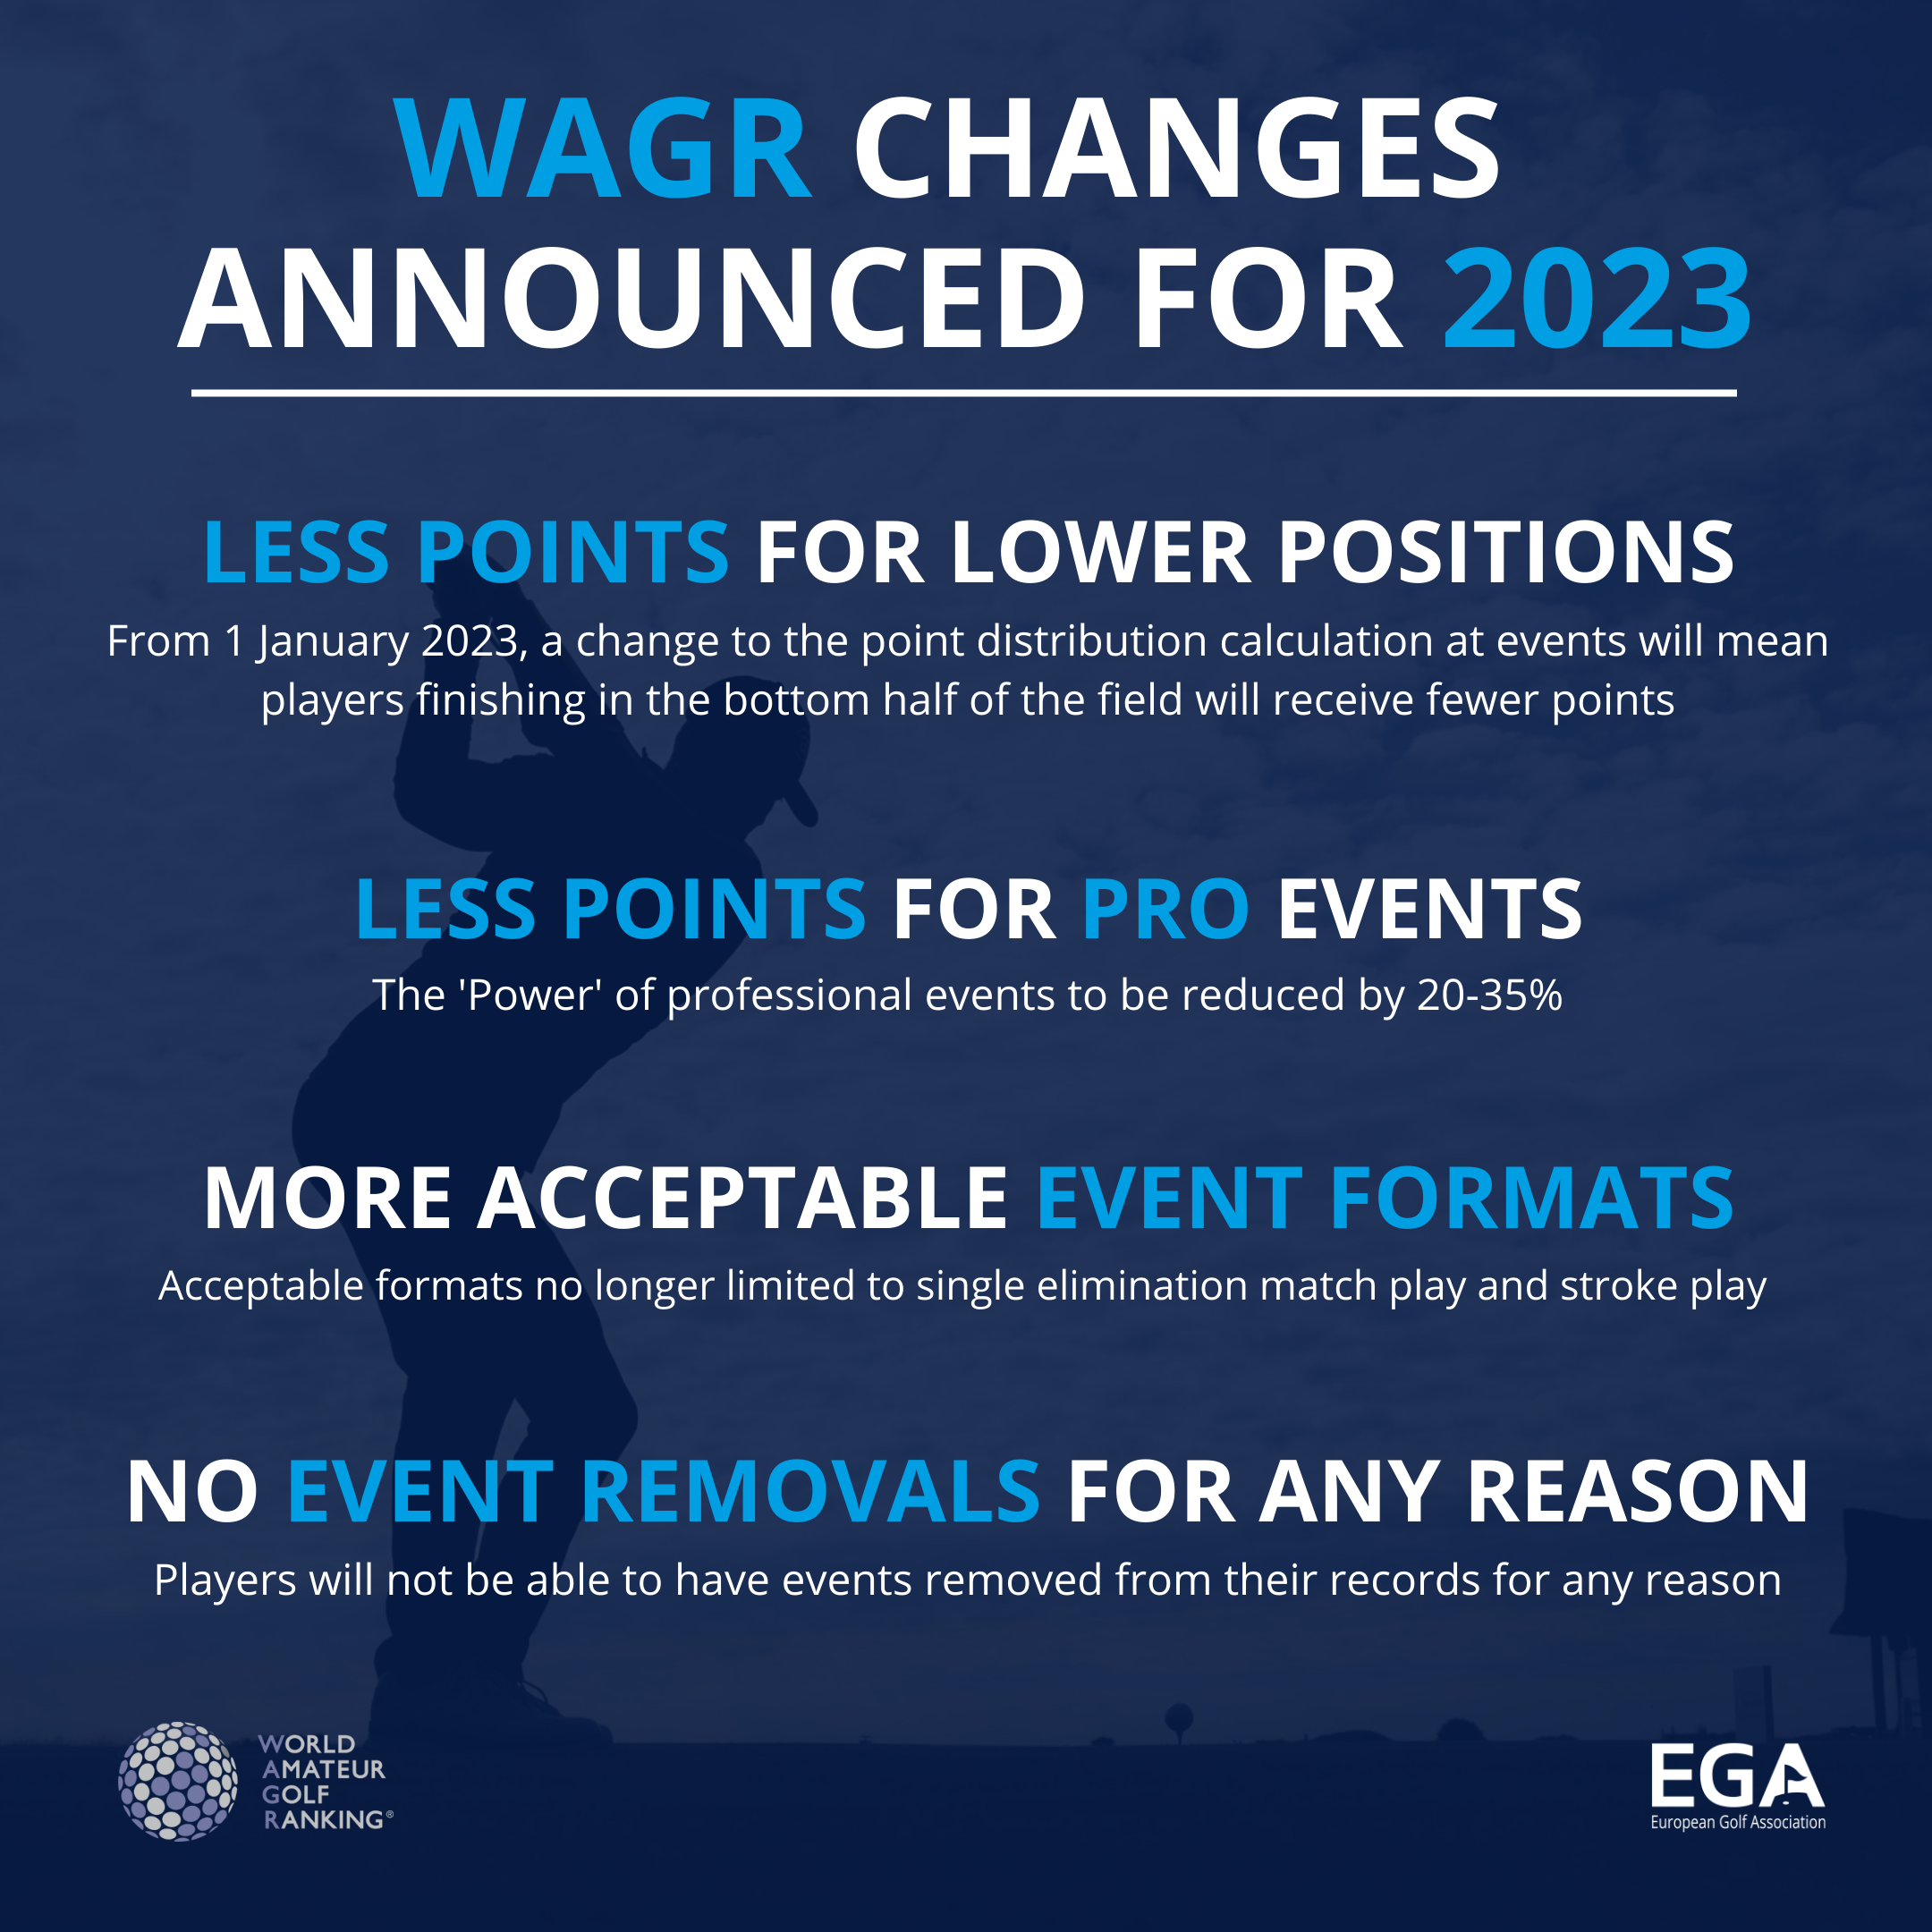 WAGR Announces Changes for 2023